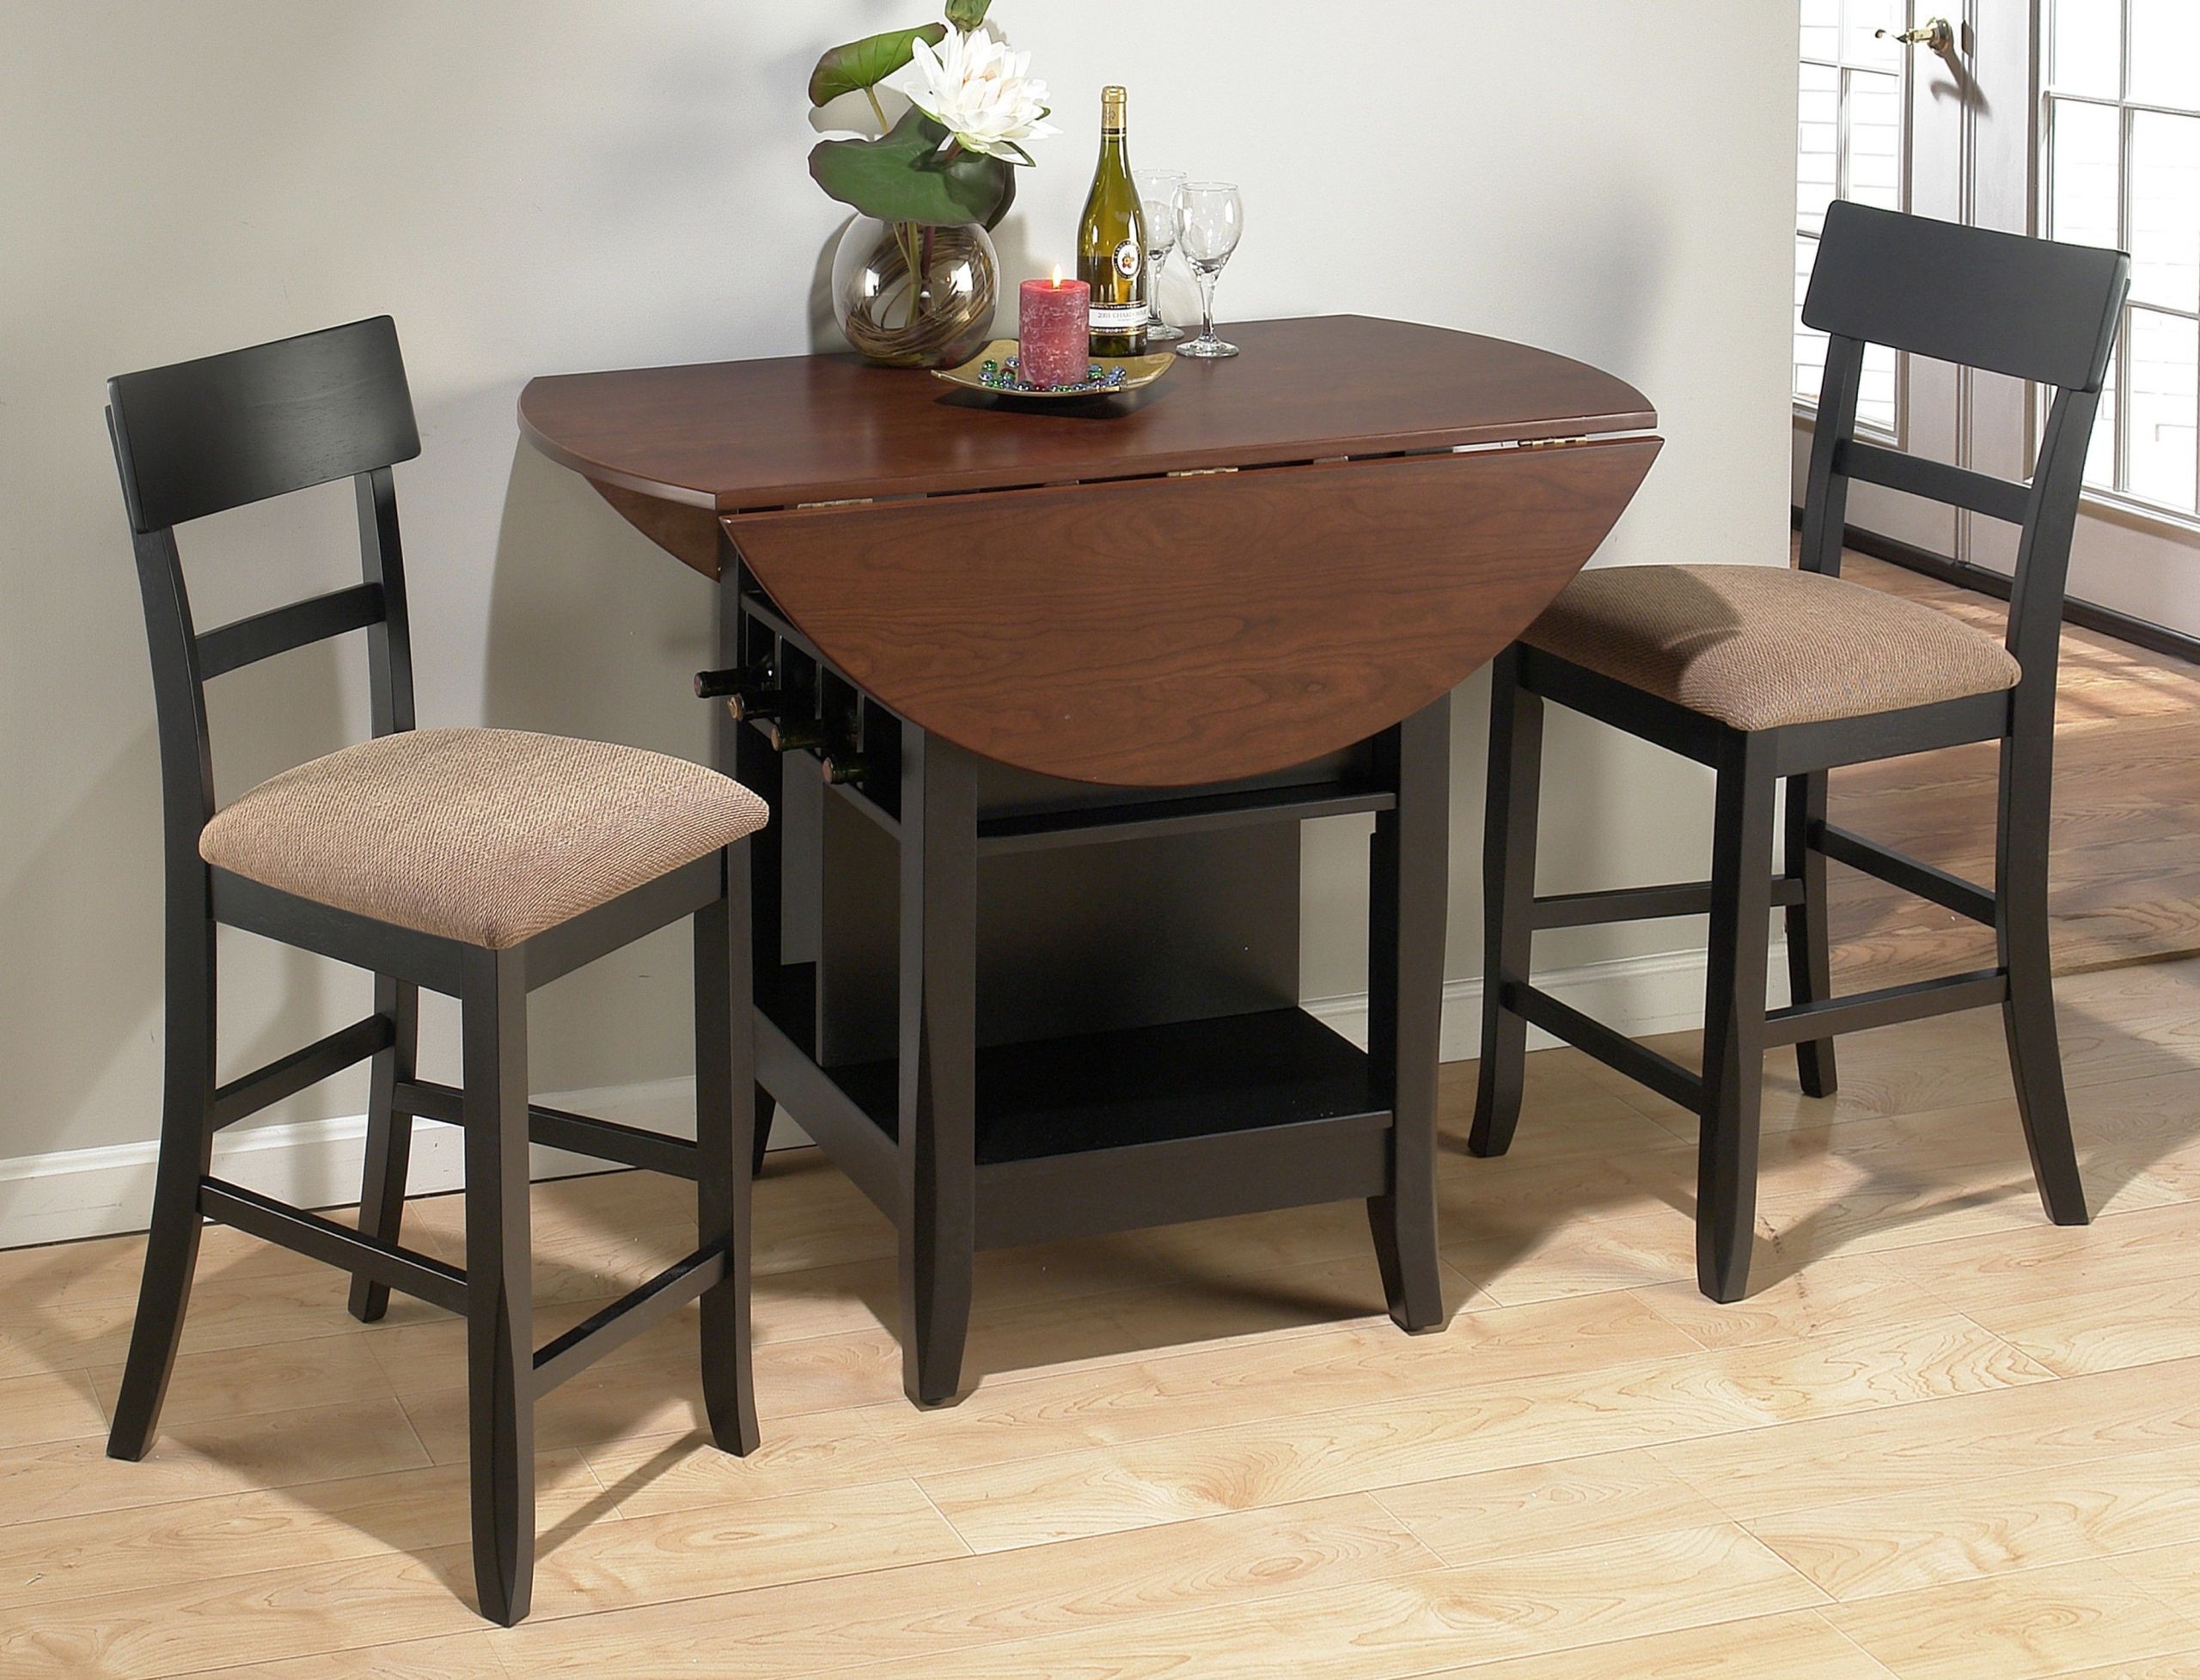 20 Stylish Cheap Small Kitchen Table Sets - Home, Decoration, Style and